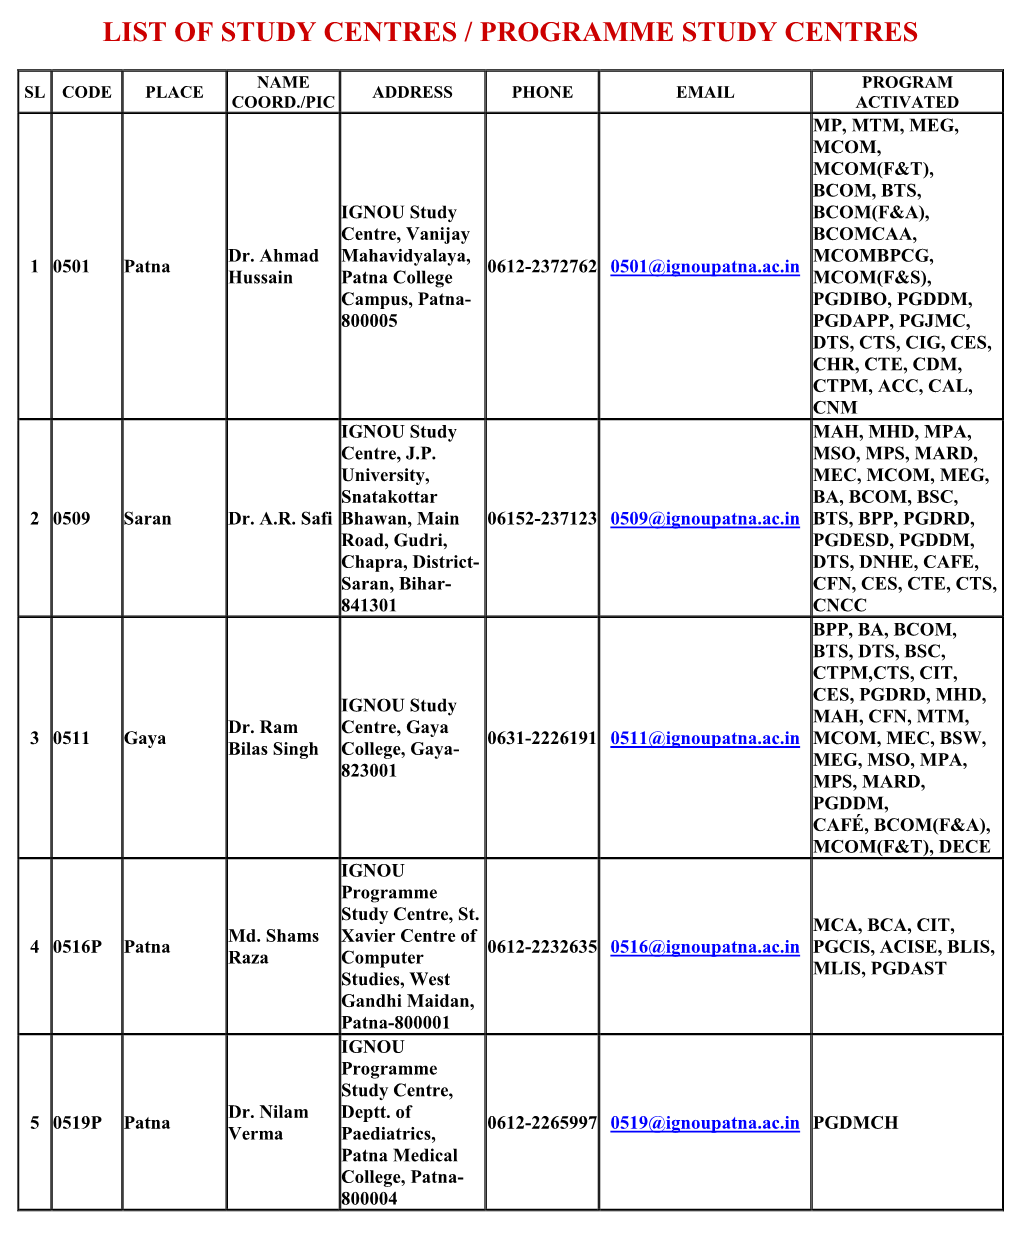 List of Study Centres / Programme Study Centres